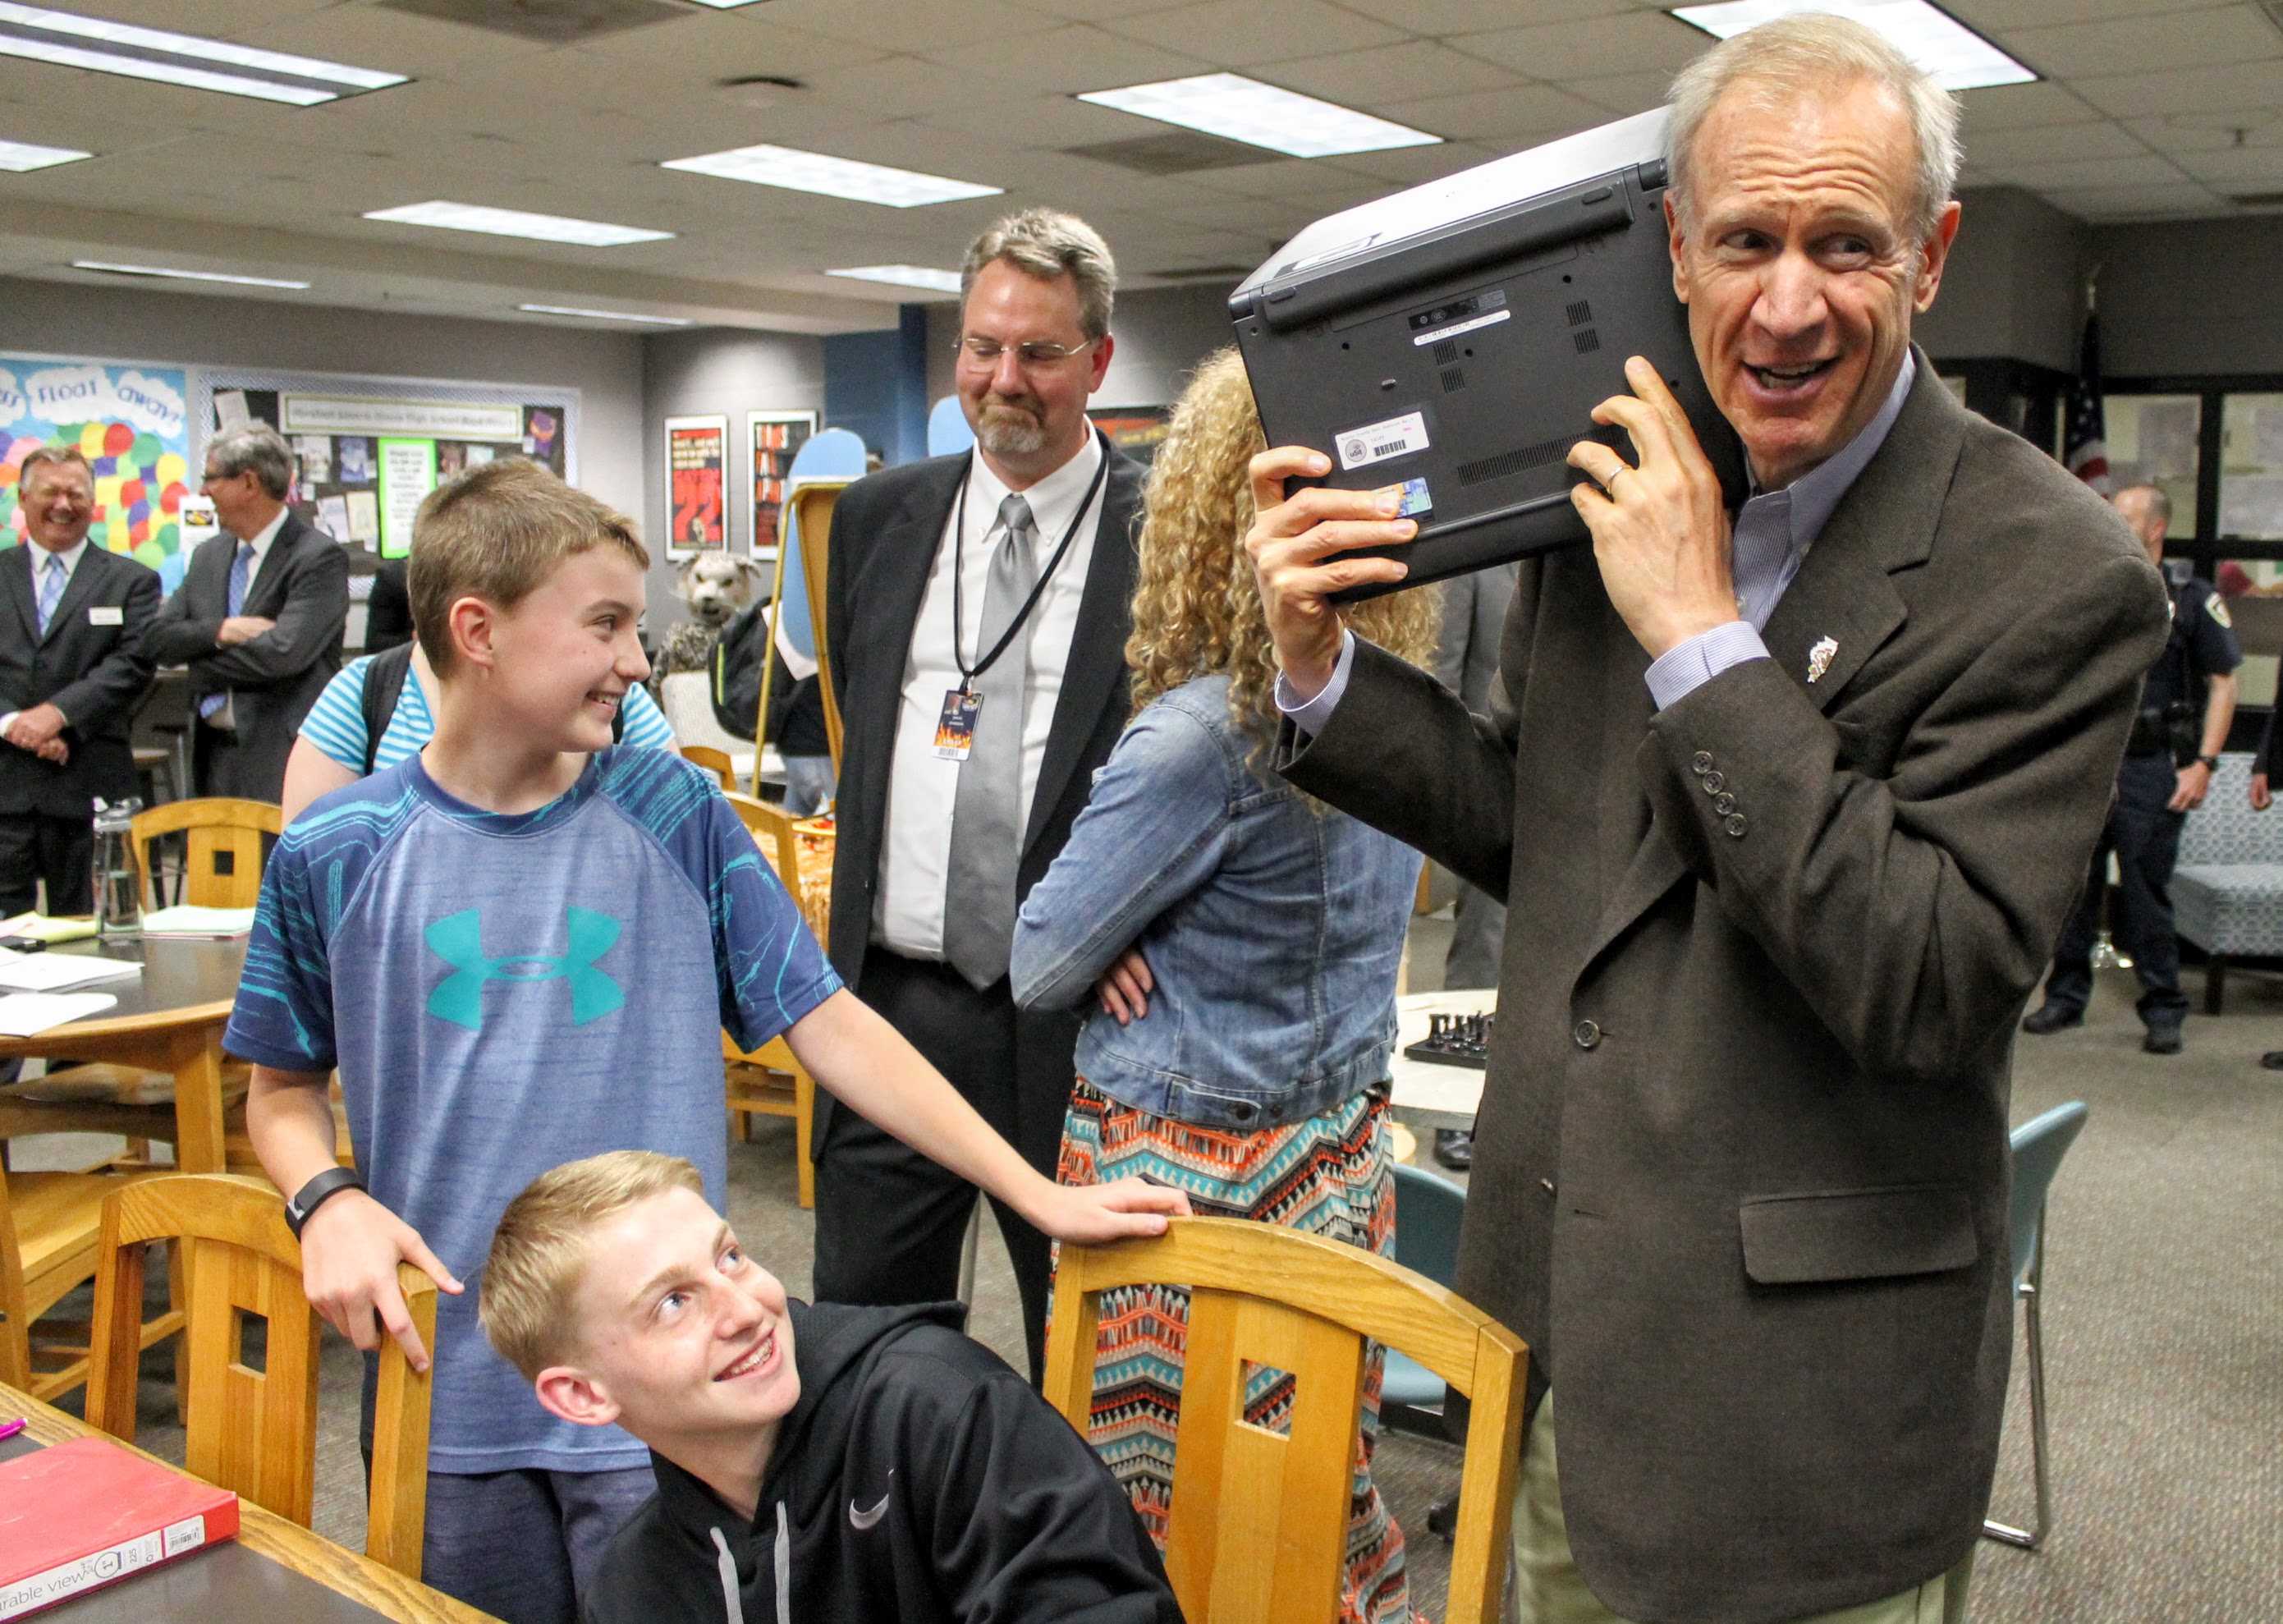 Governor Rauner inspects district technology during touring the Normal West library.